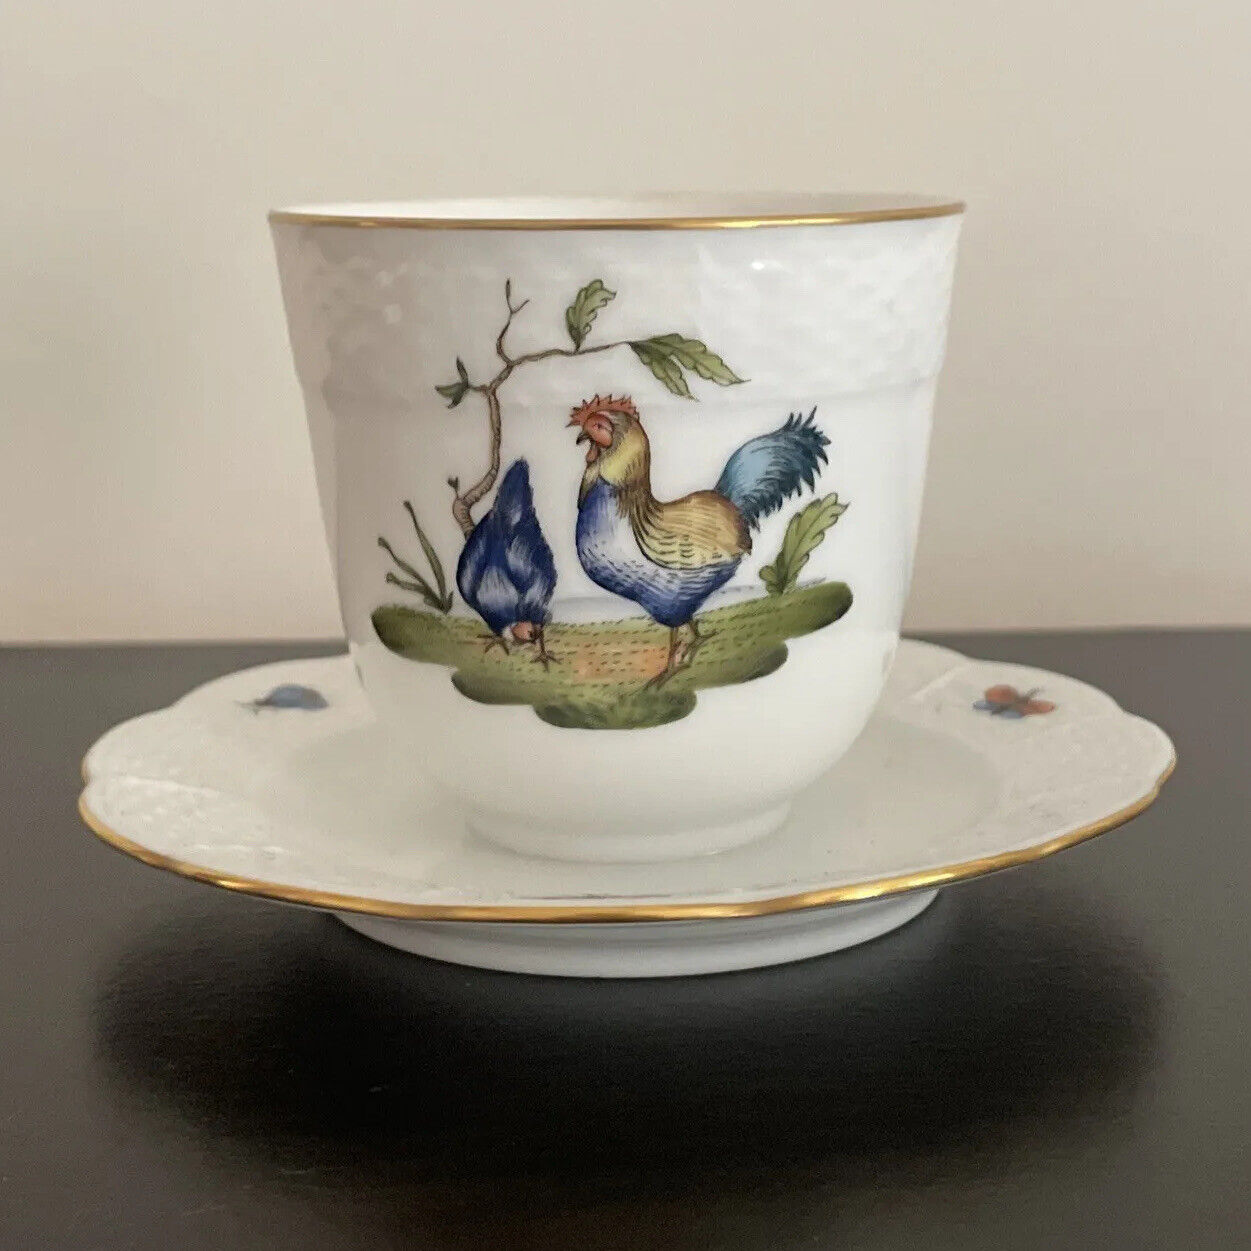 *Mint* Herend Chanticleer Jam Jar w Attached Saucer (Rooster, Bugs), Retail $465